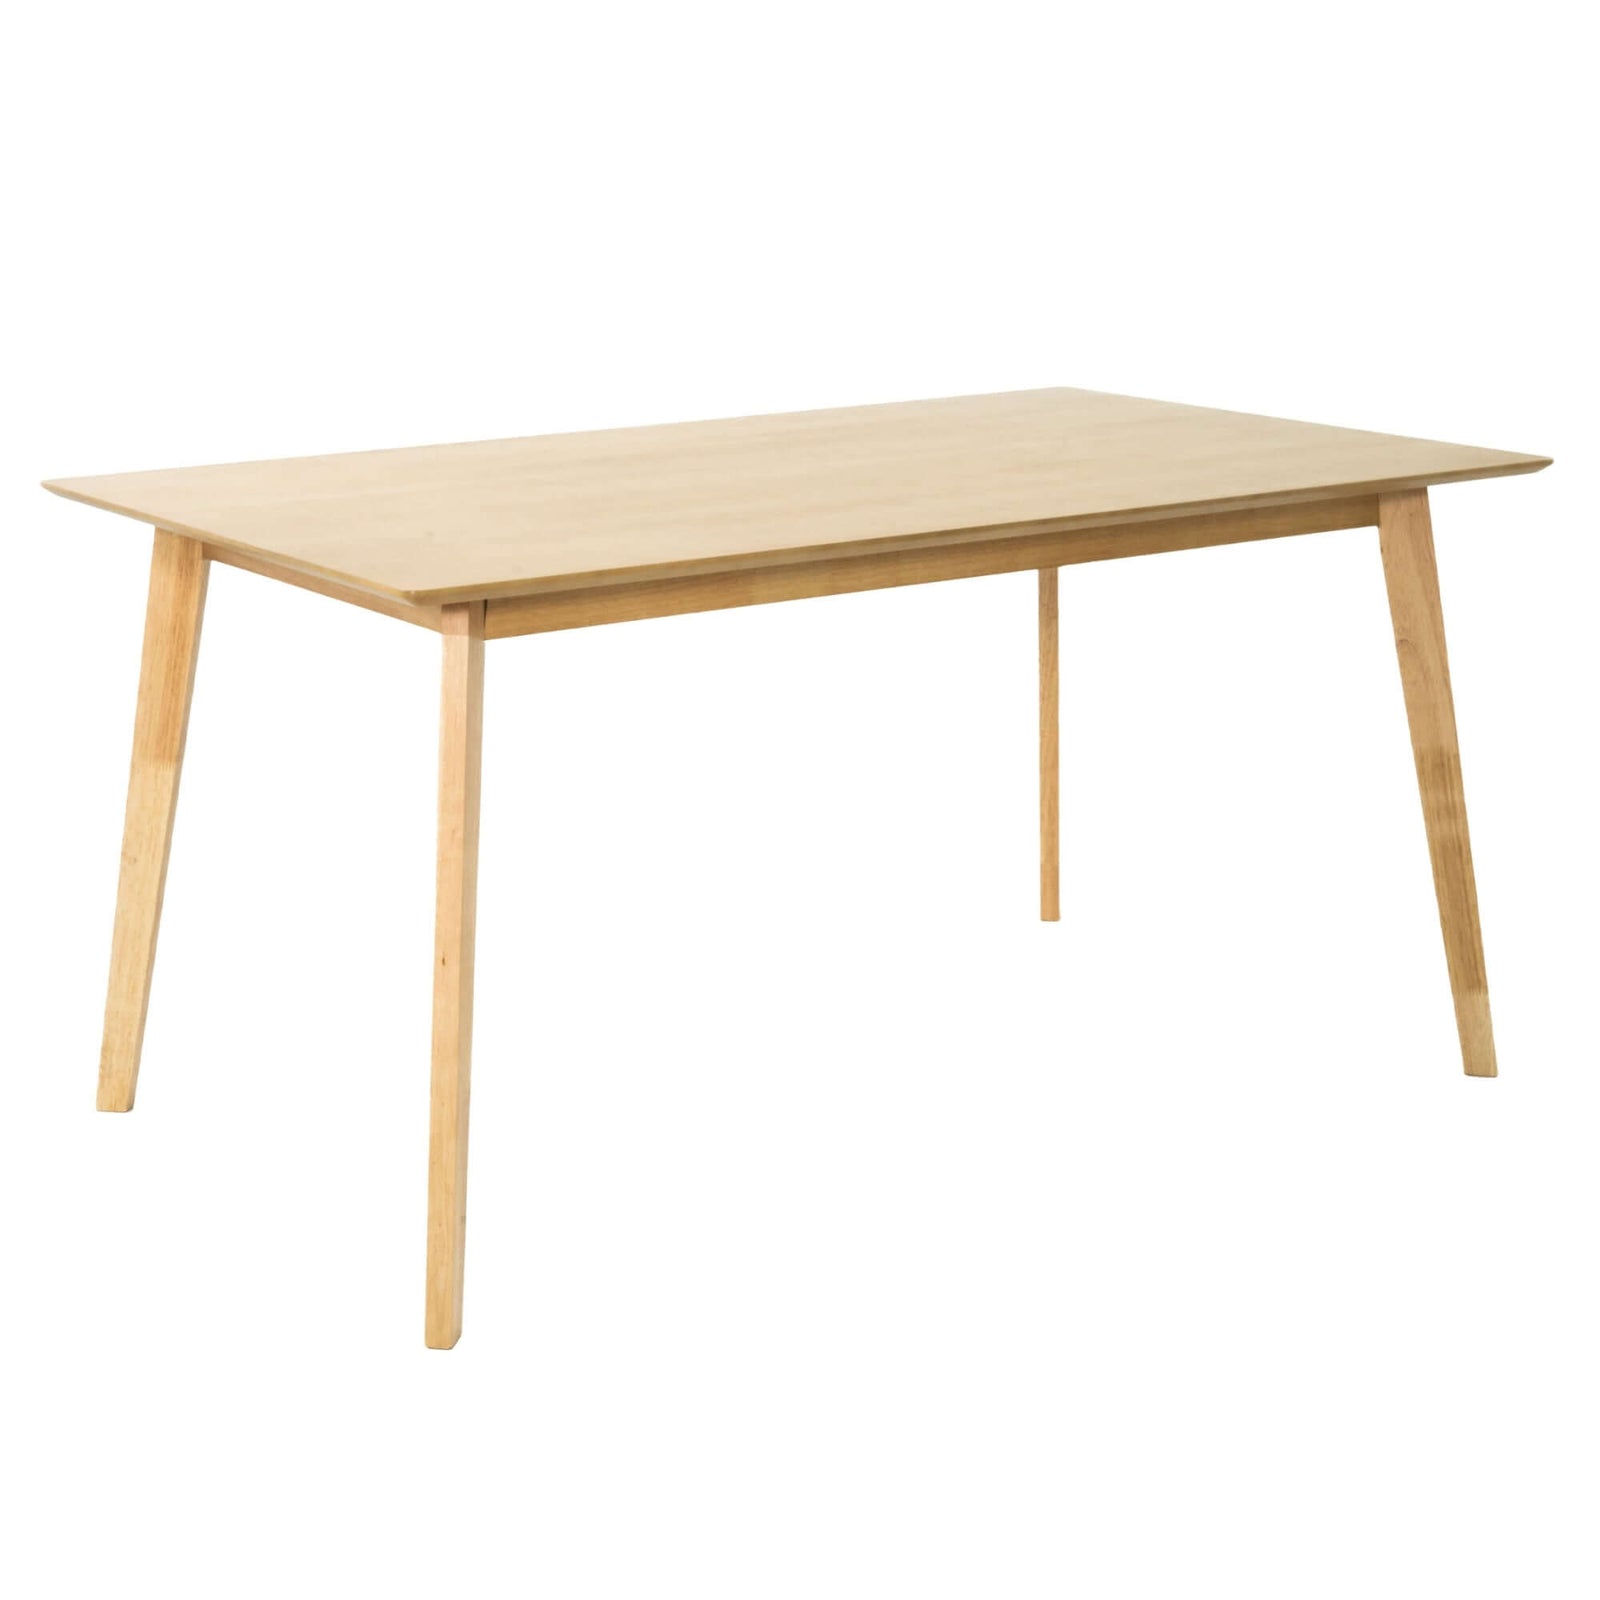 Cusco 150cm Dining Table Scandinavian Style Solid Rubberwood Natural-Upinteriors